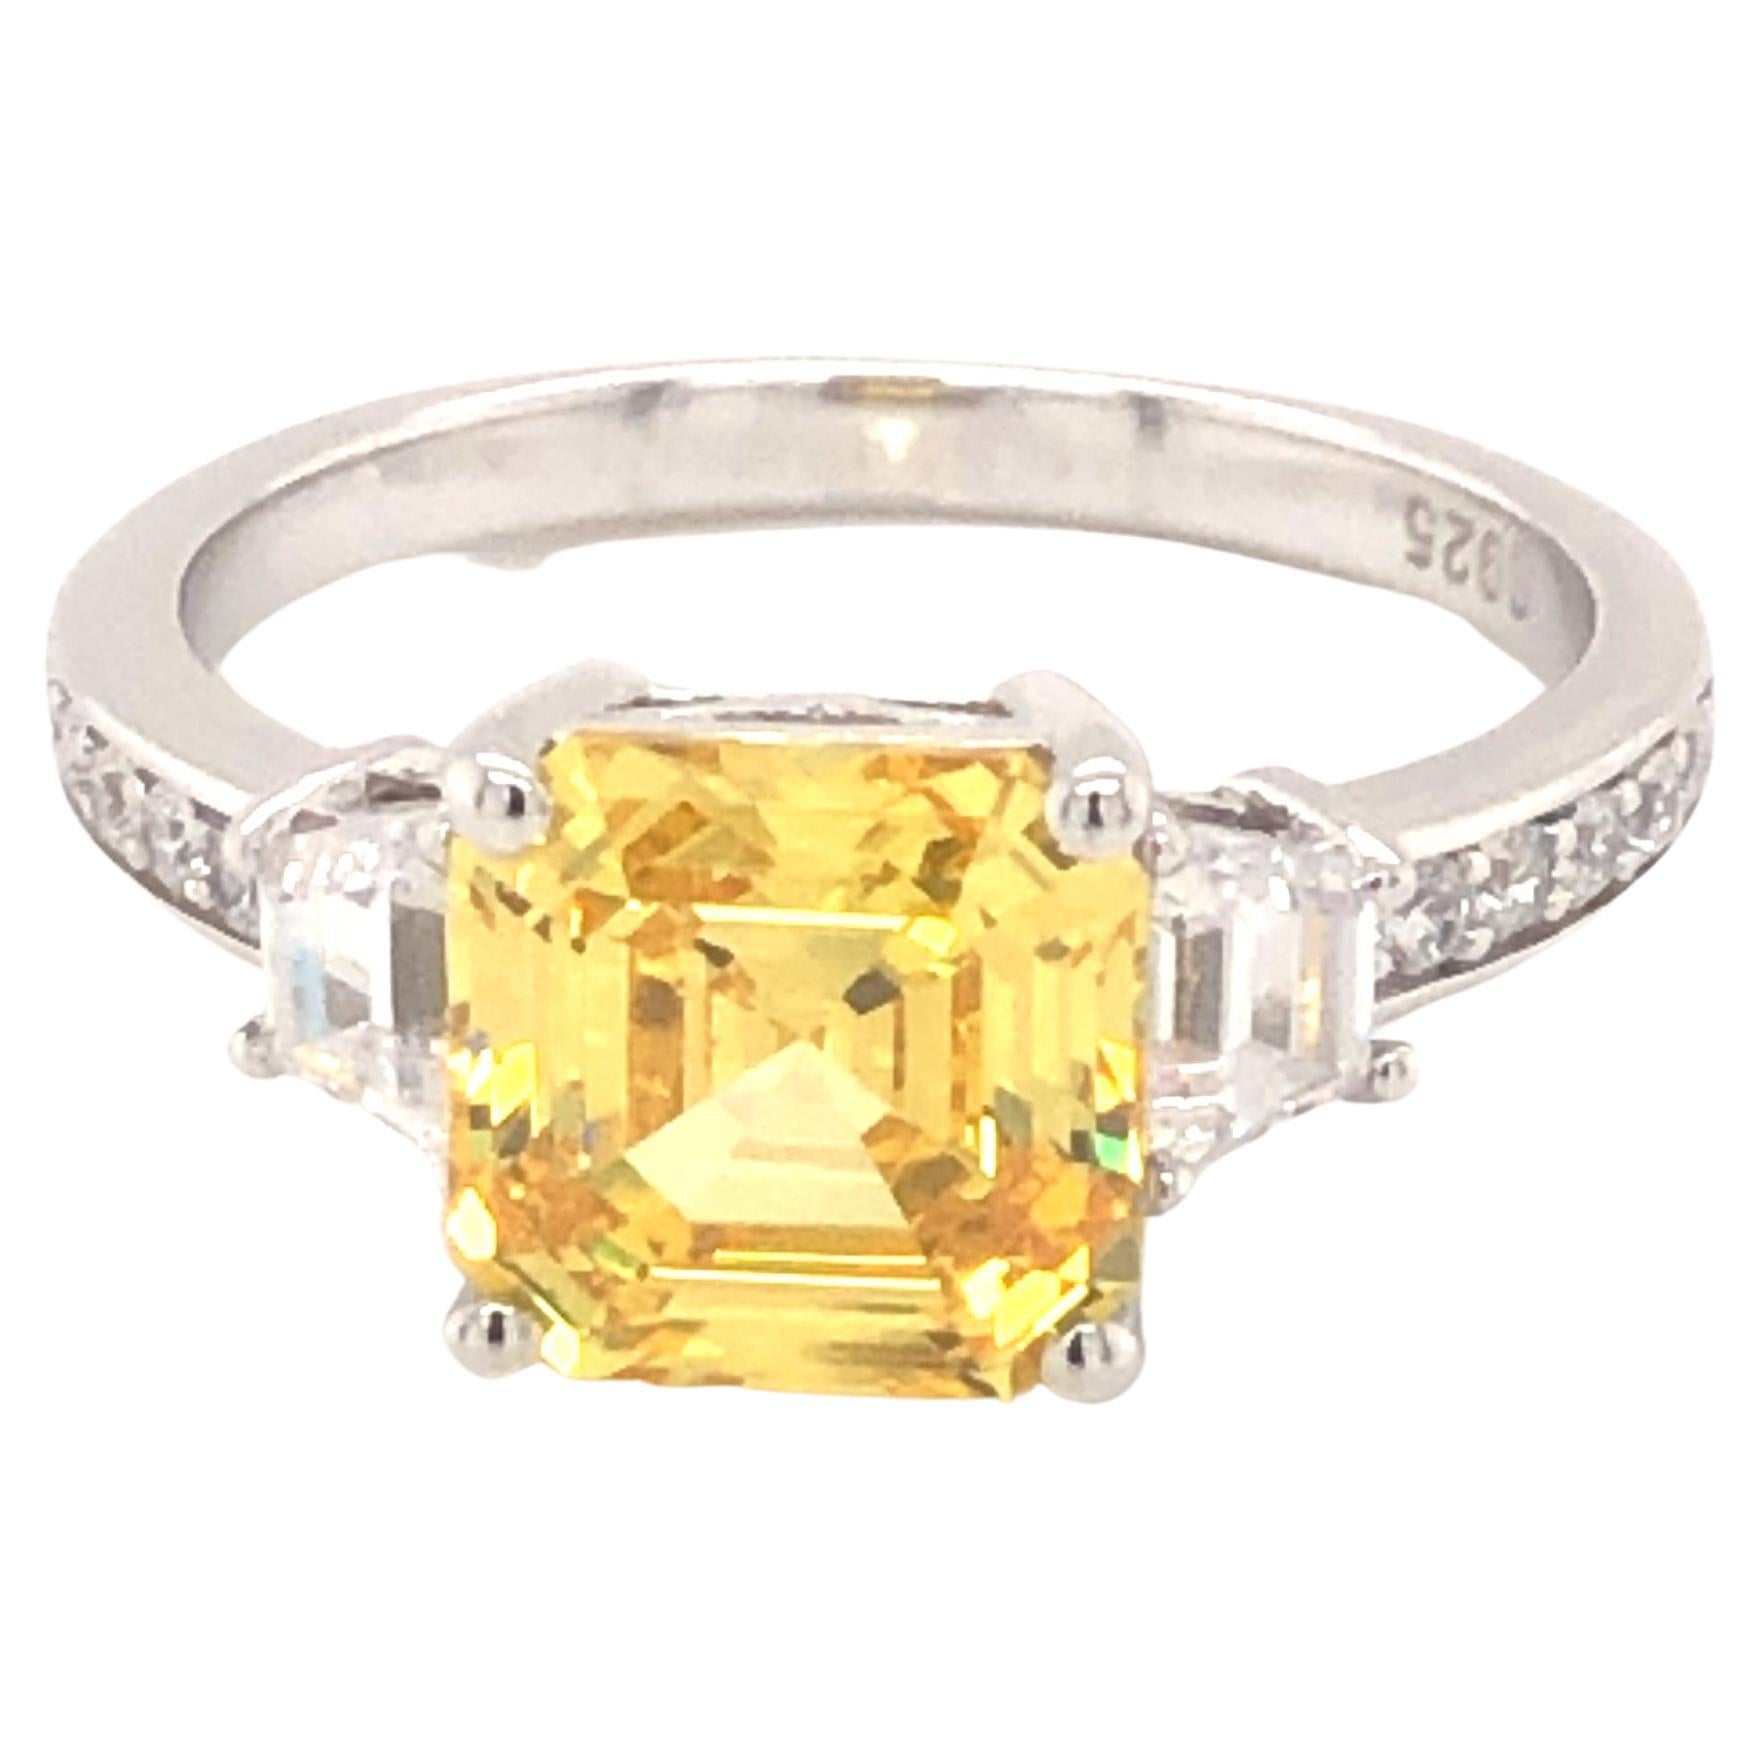 Glorious sunshine hues radiate from this elegant and classic ring. Featuring a dazzling 3.50ct centre asscher cut cubic zirconia flanked by two tapered princess cuts with five round brilliant cuts on either side. 

Composed of 925 sterling silver